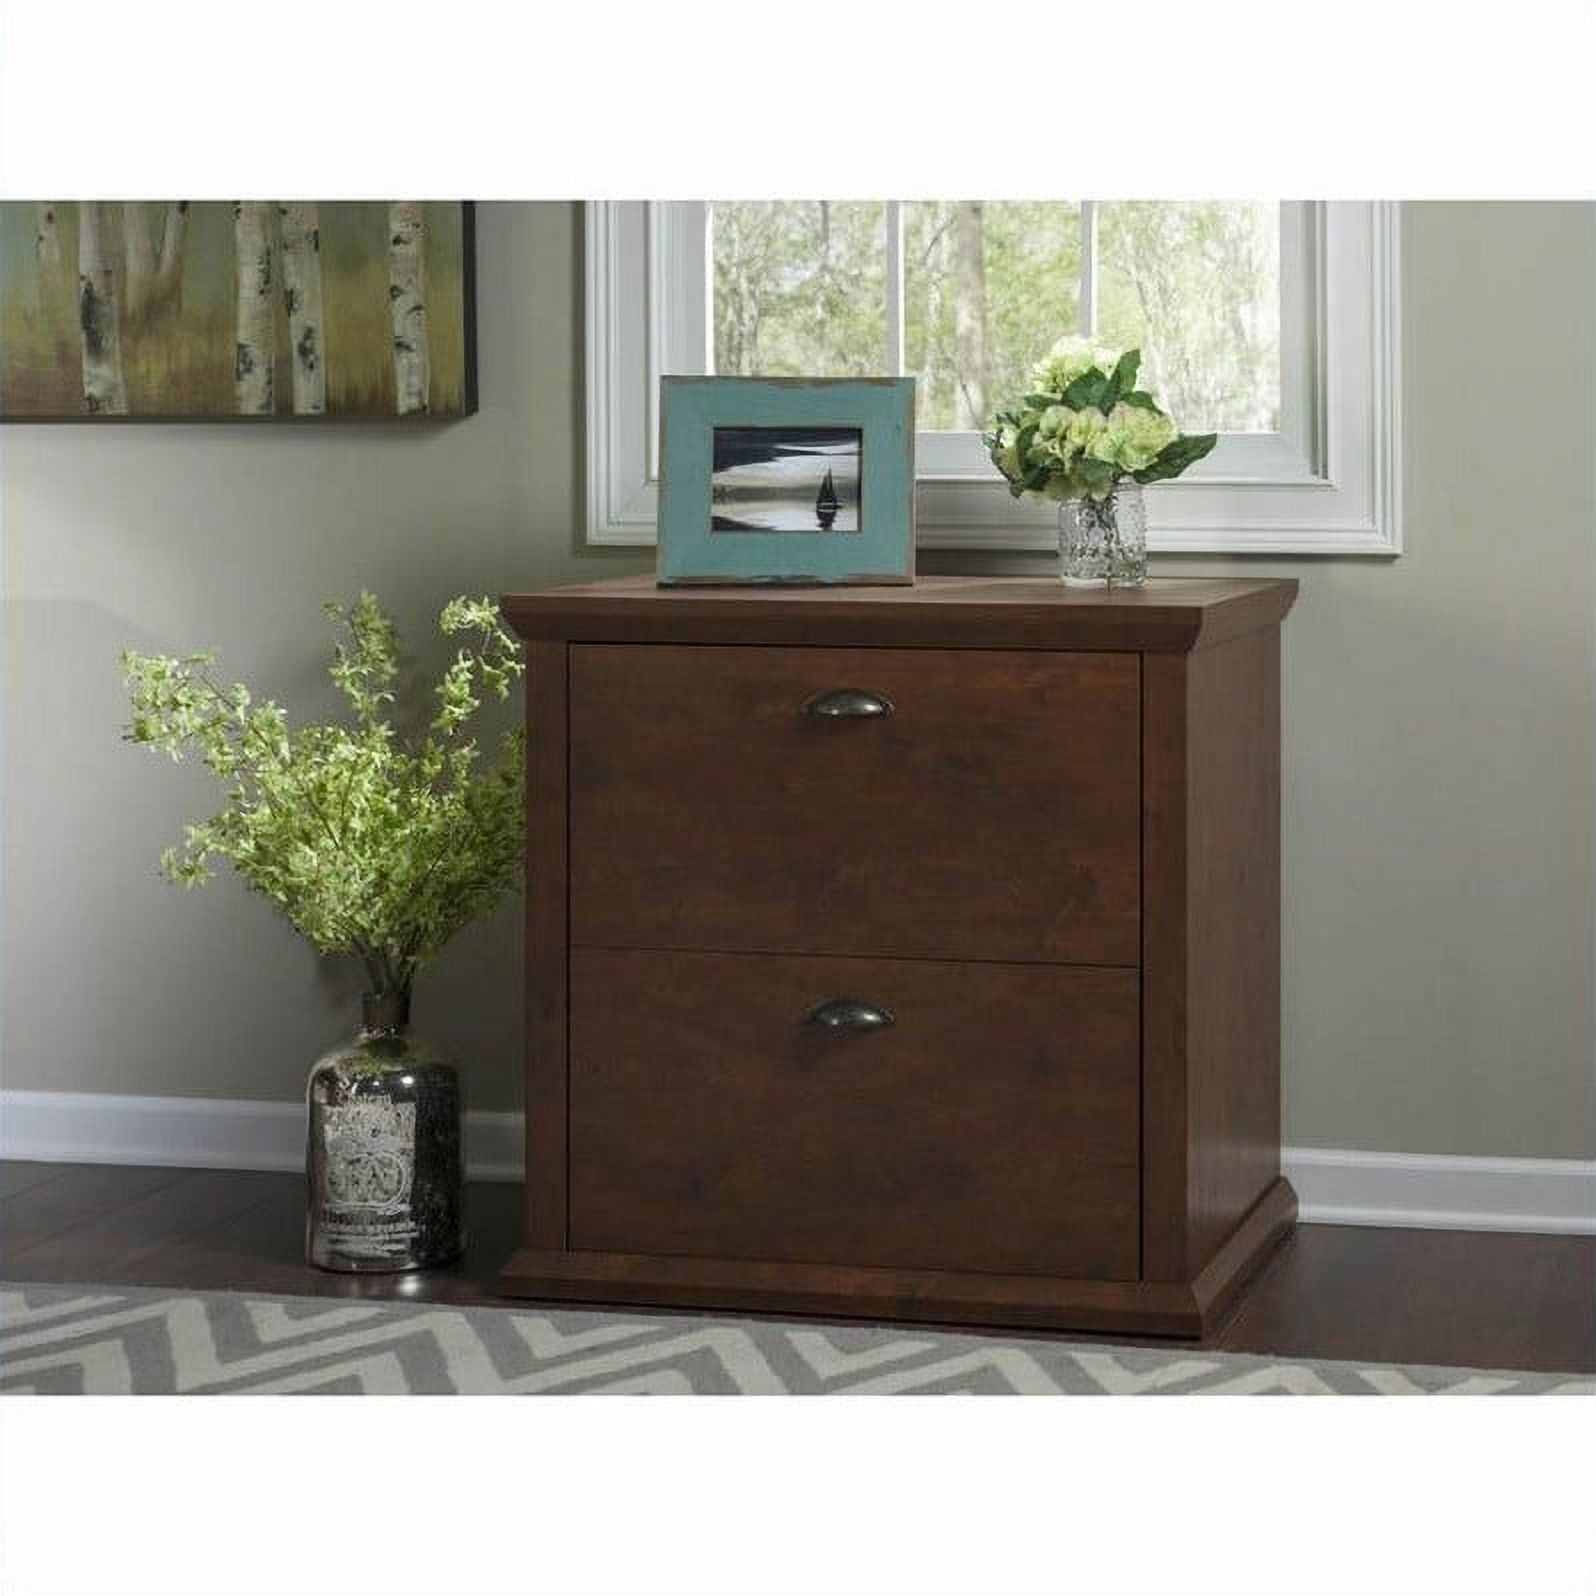 Scranton & Co 2 Drawer Lateral File Cabinet in Antique Cherry - image 2 of 5